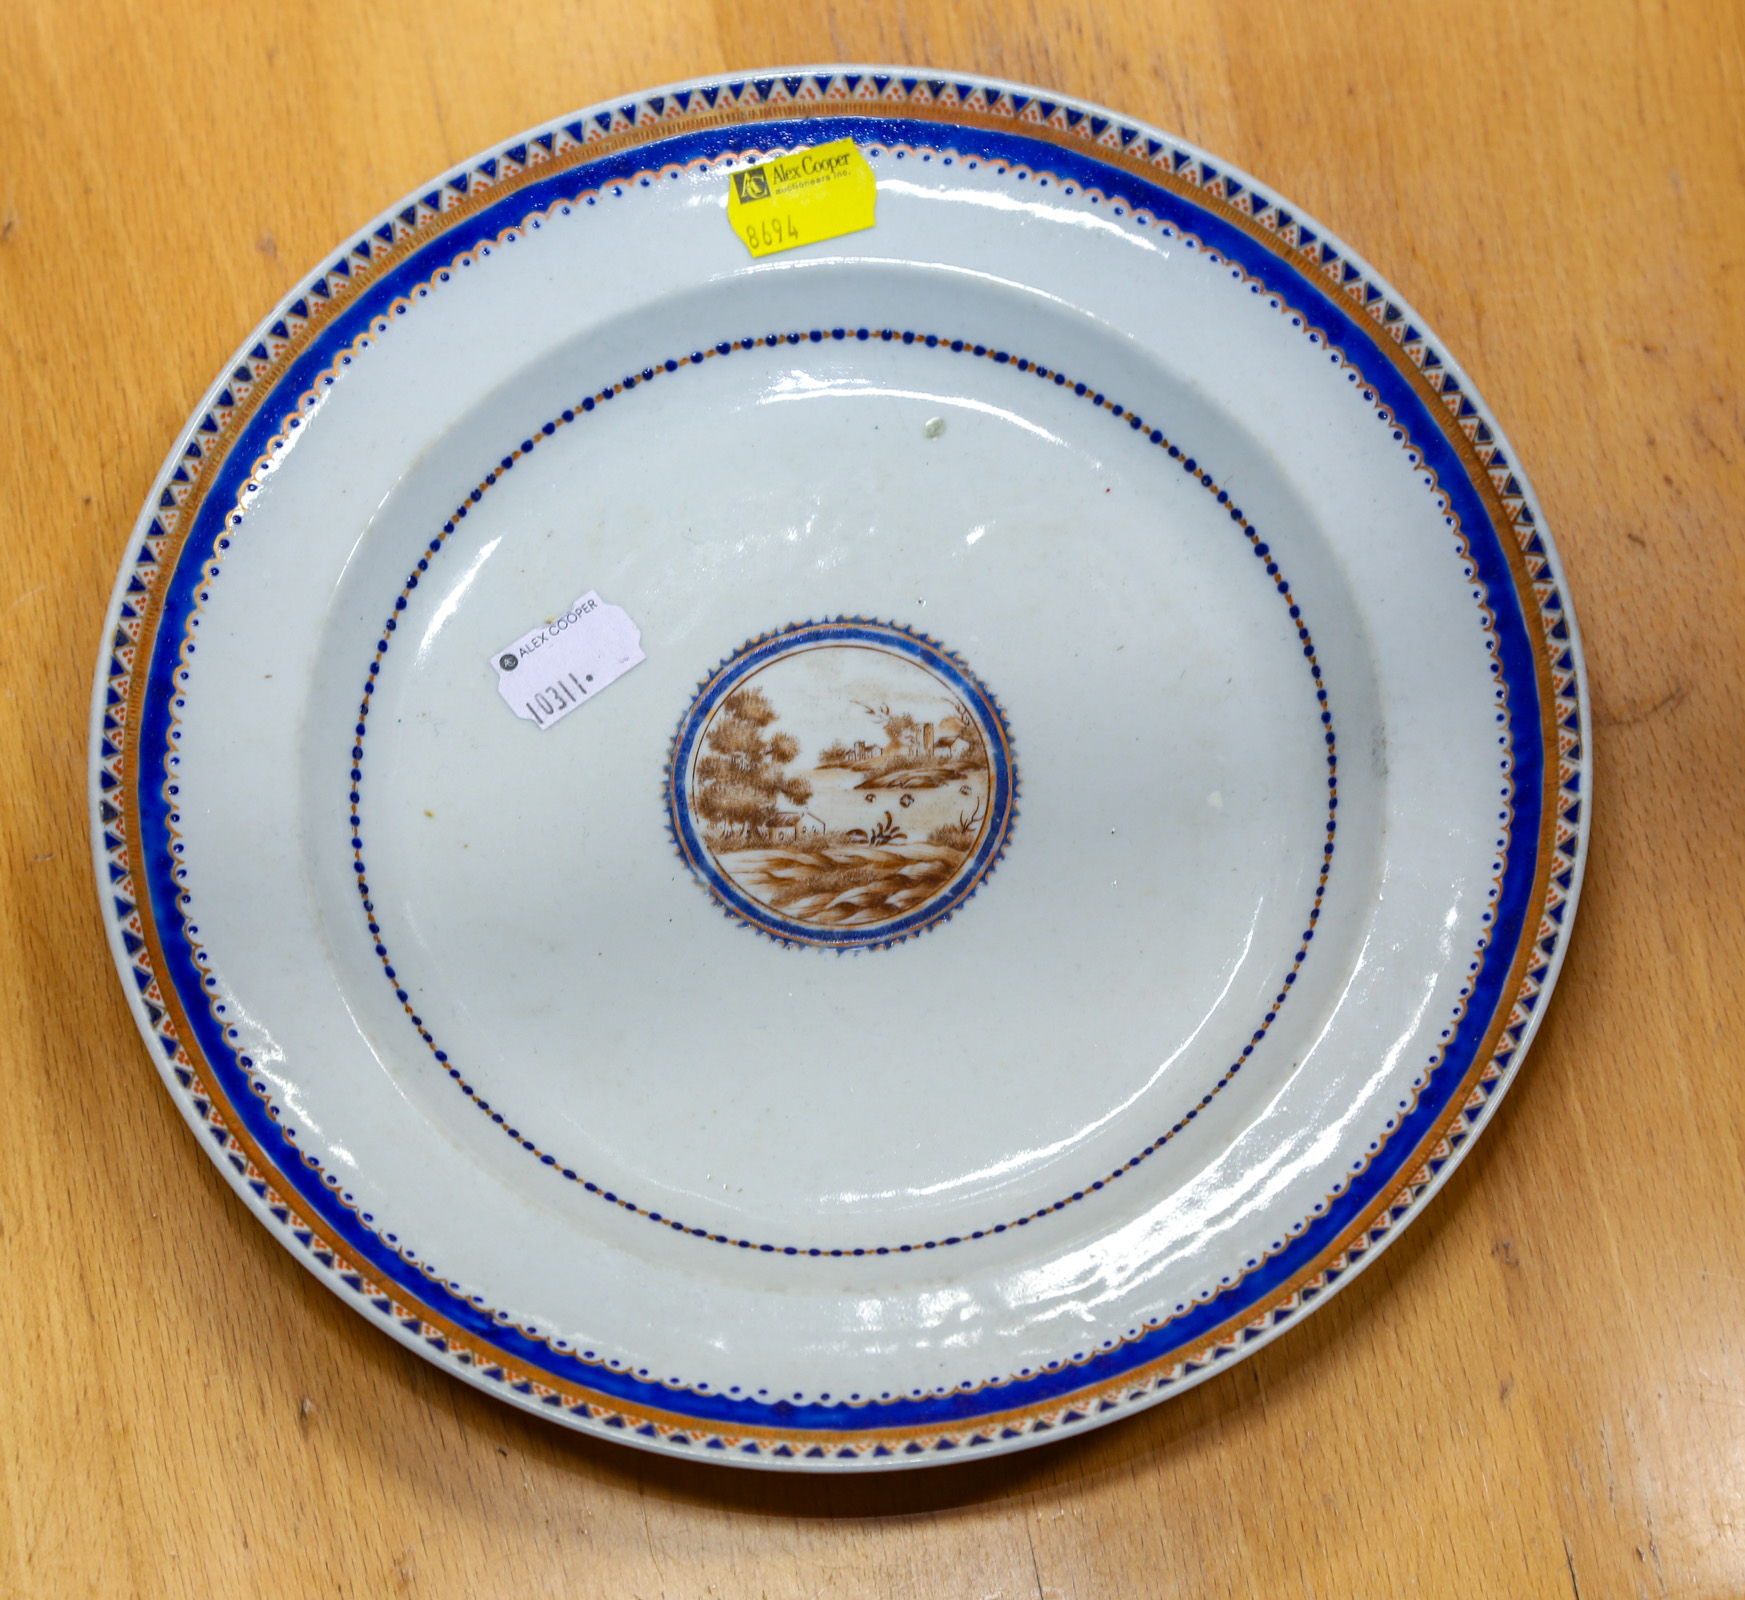 CHINESE EXPORT PORCELAIN PLATE 3cb424